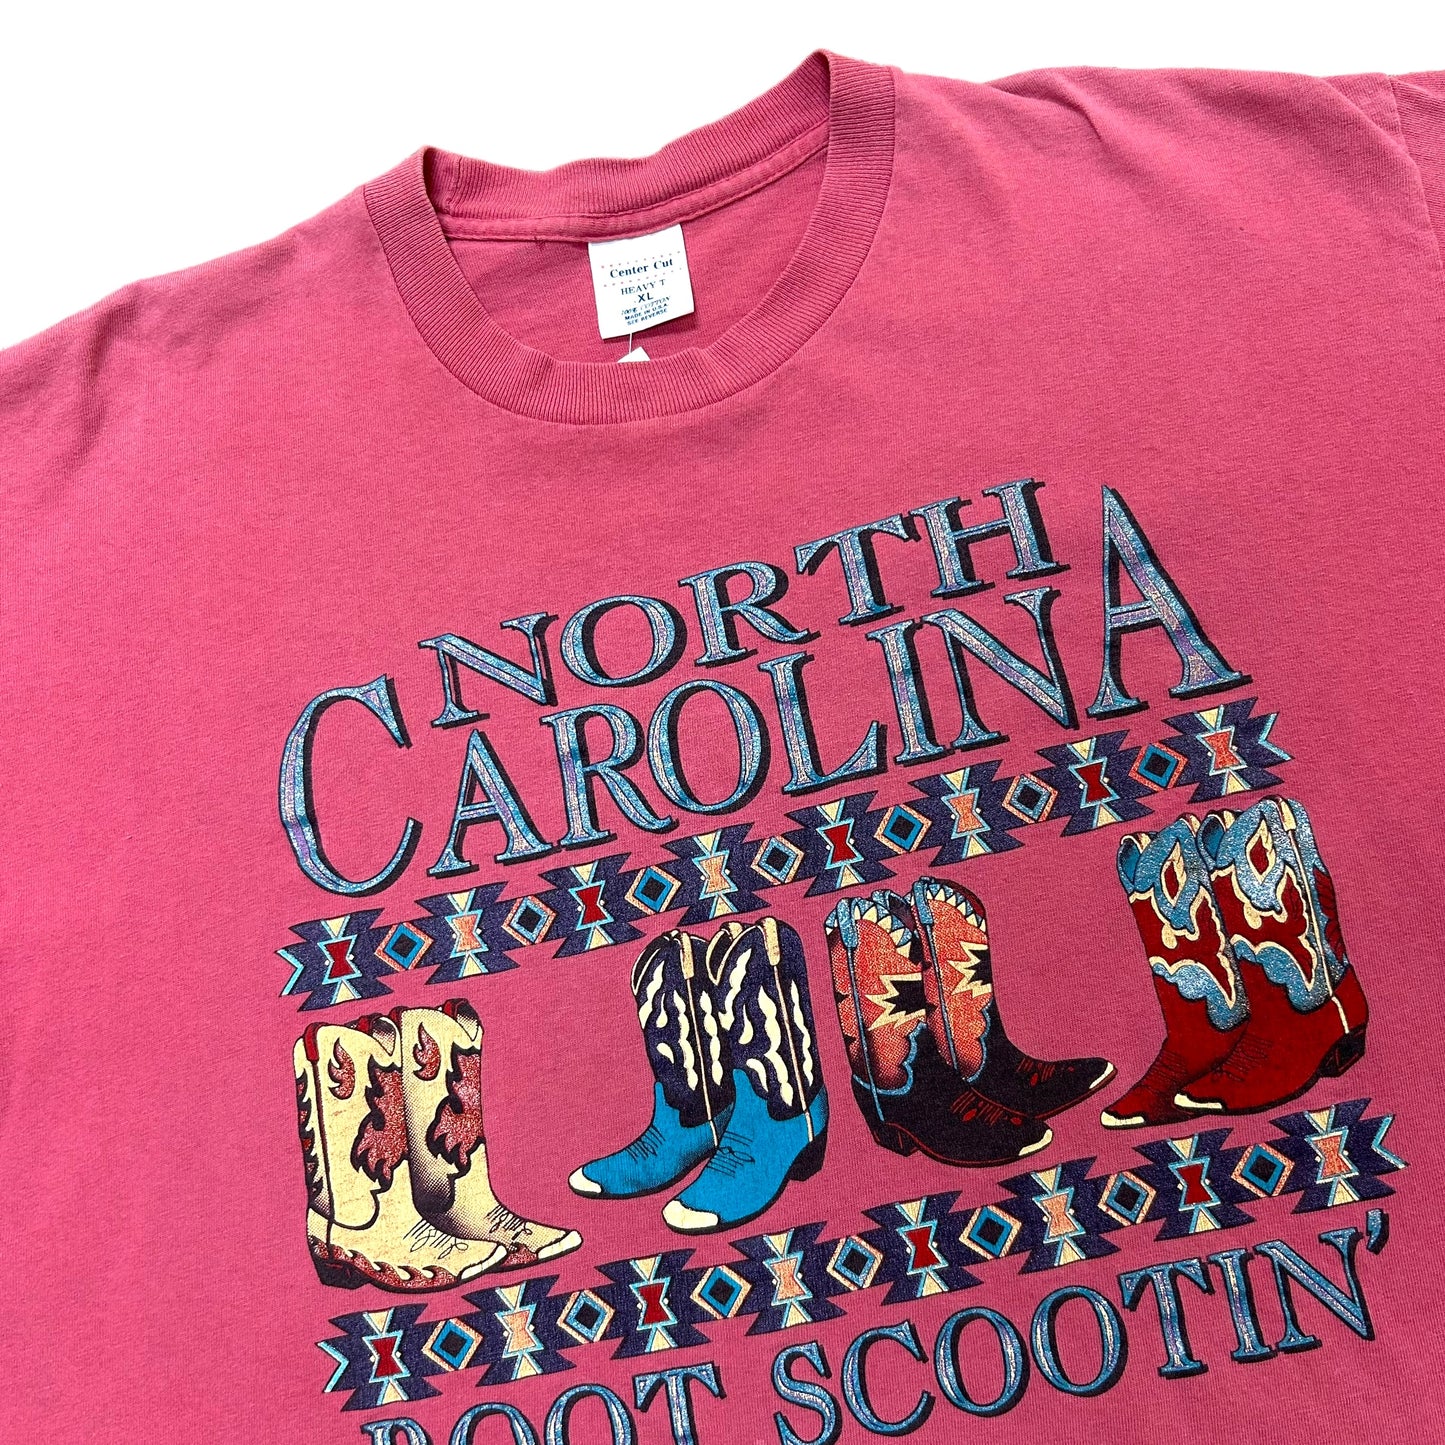 Vintage 1990s North Carolina “Boot Scootin” Pink Graphic T-Shirt - Size XL